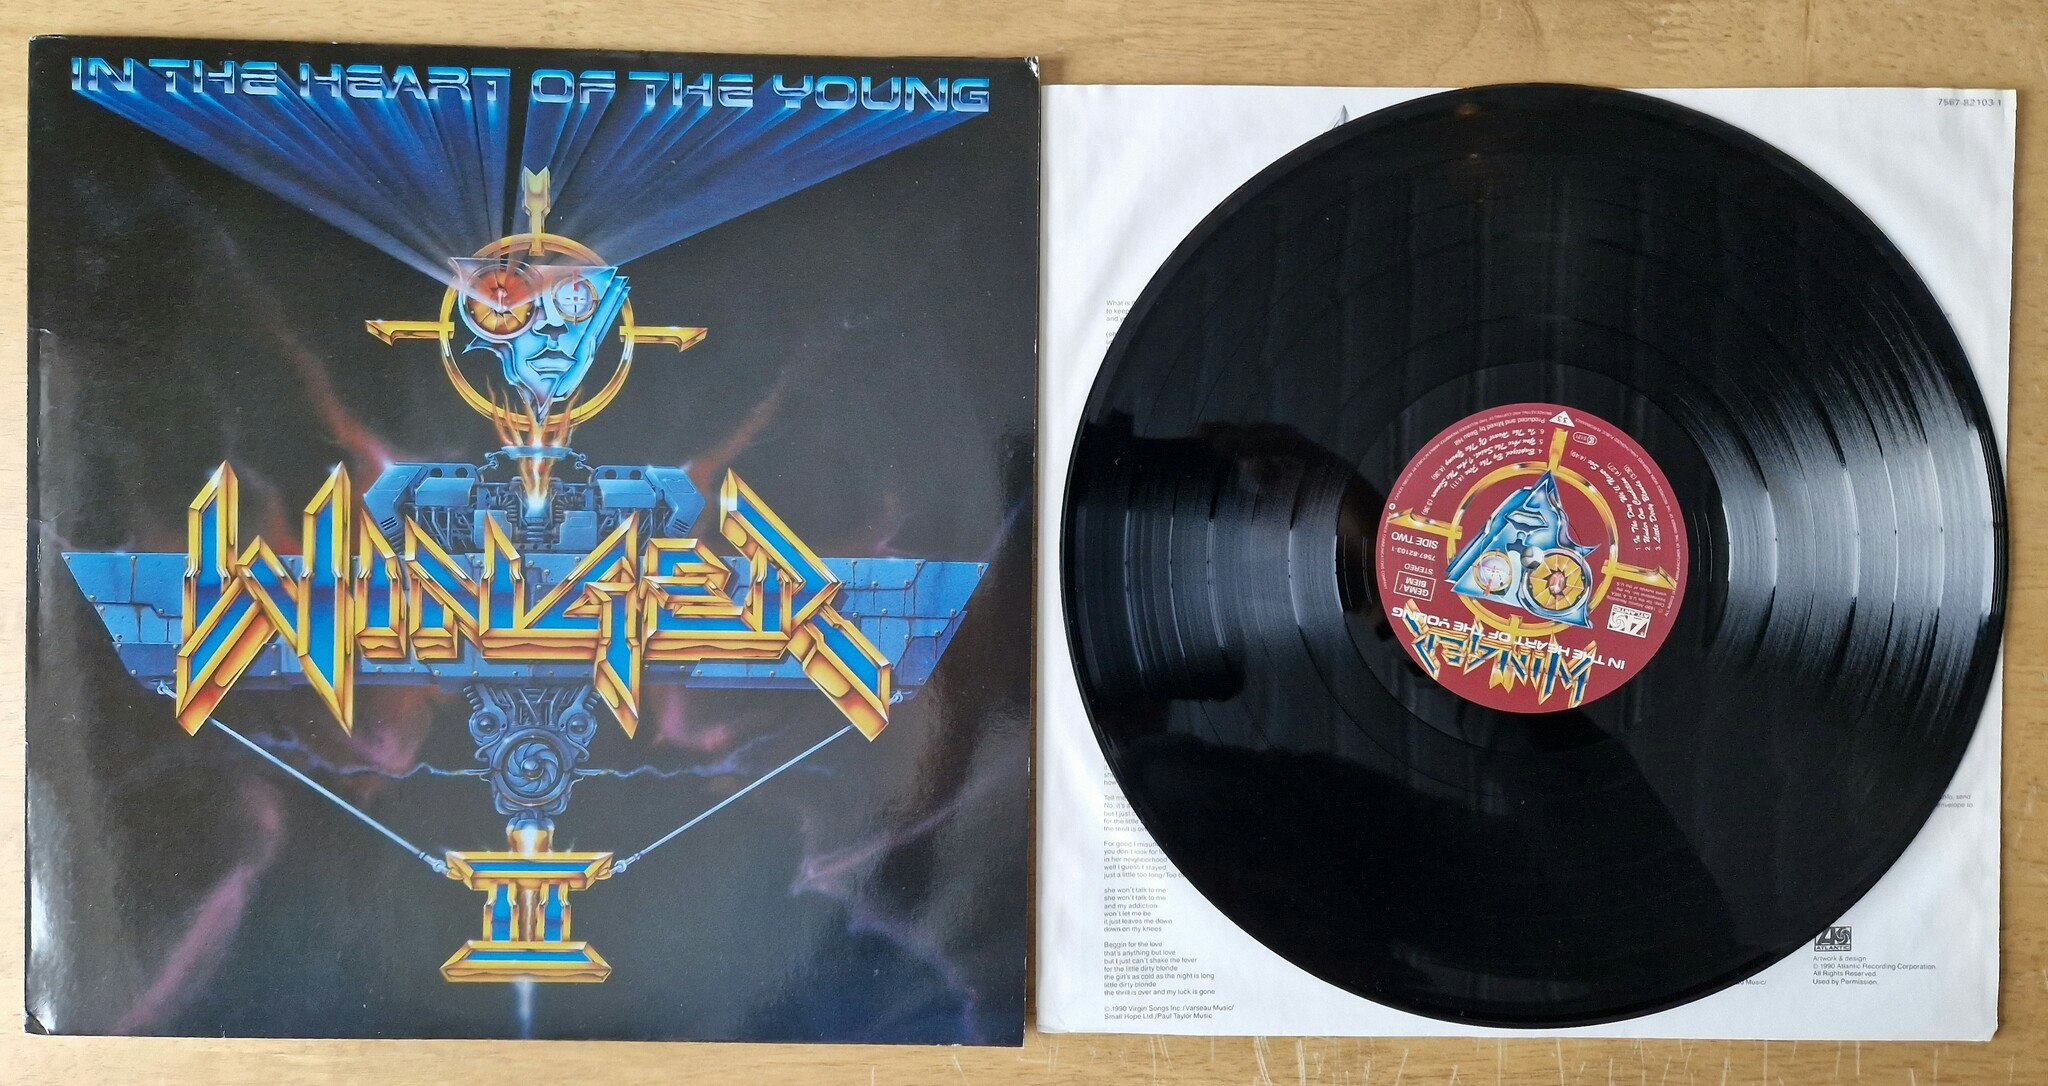 Winger, In the heart of the young. Vinyl LP